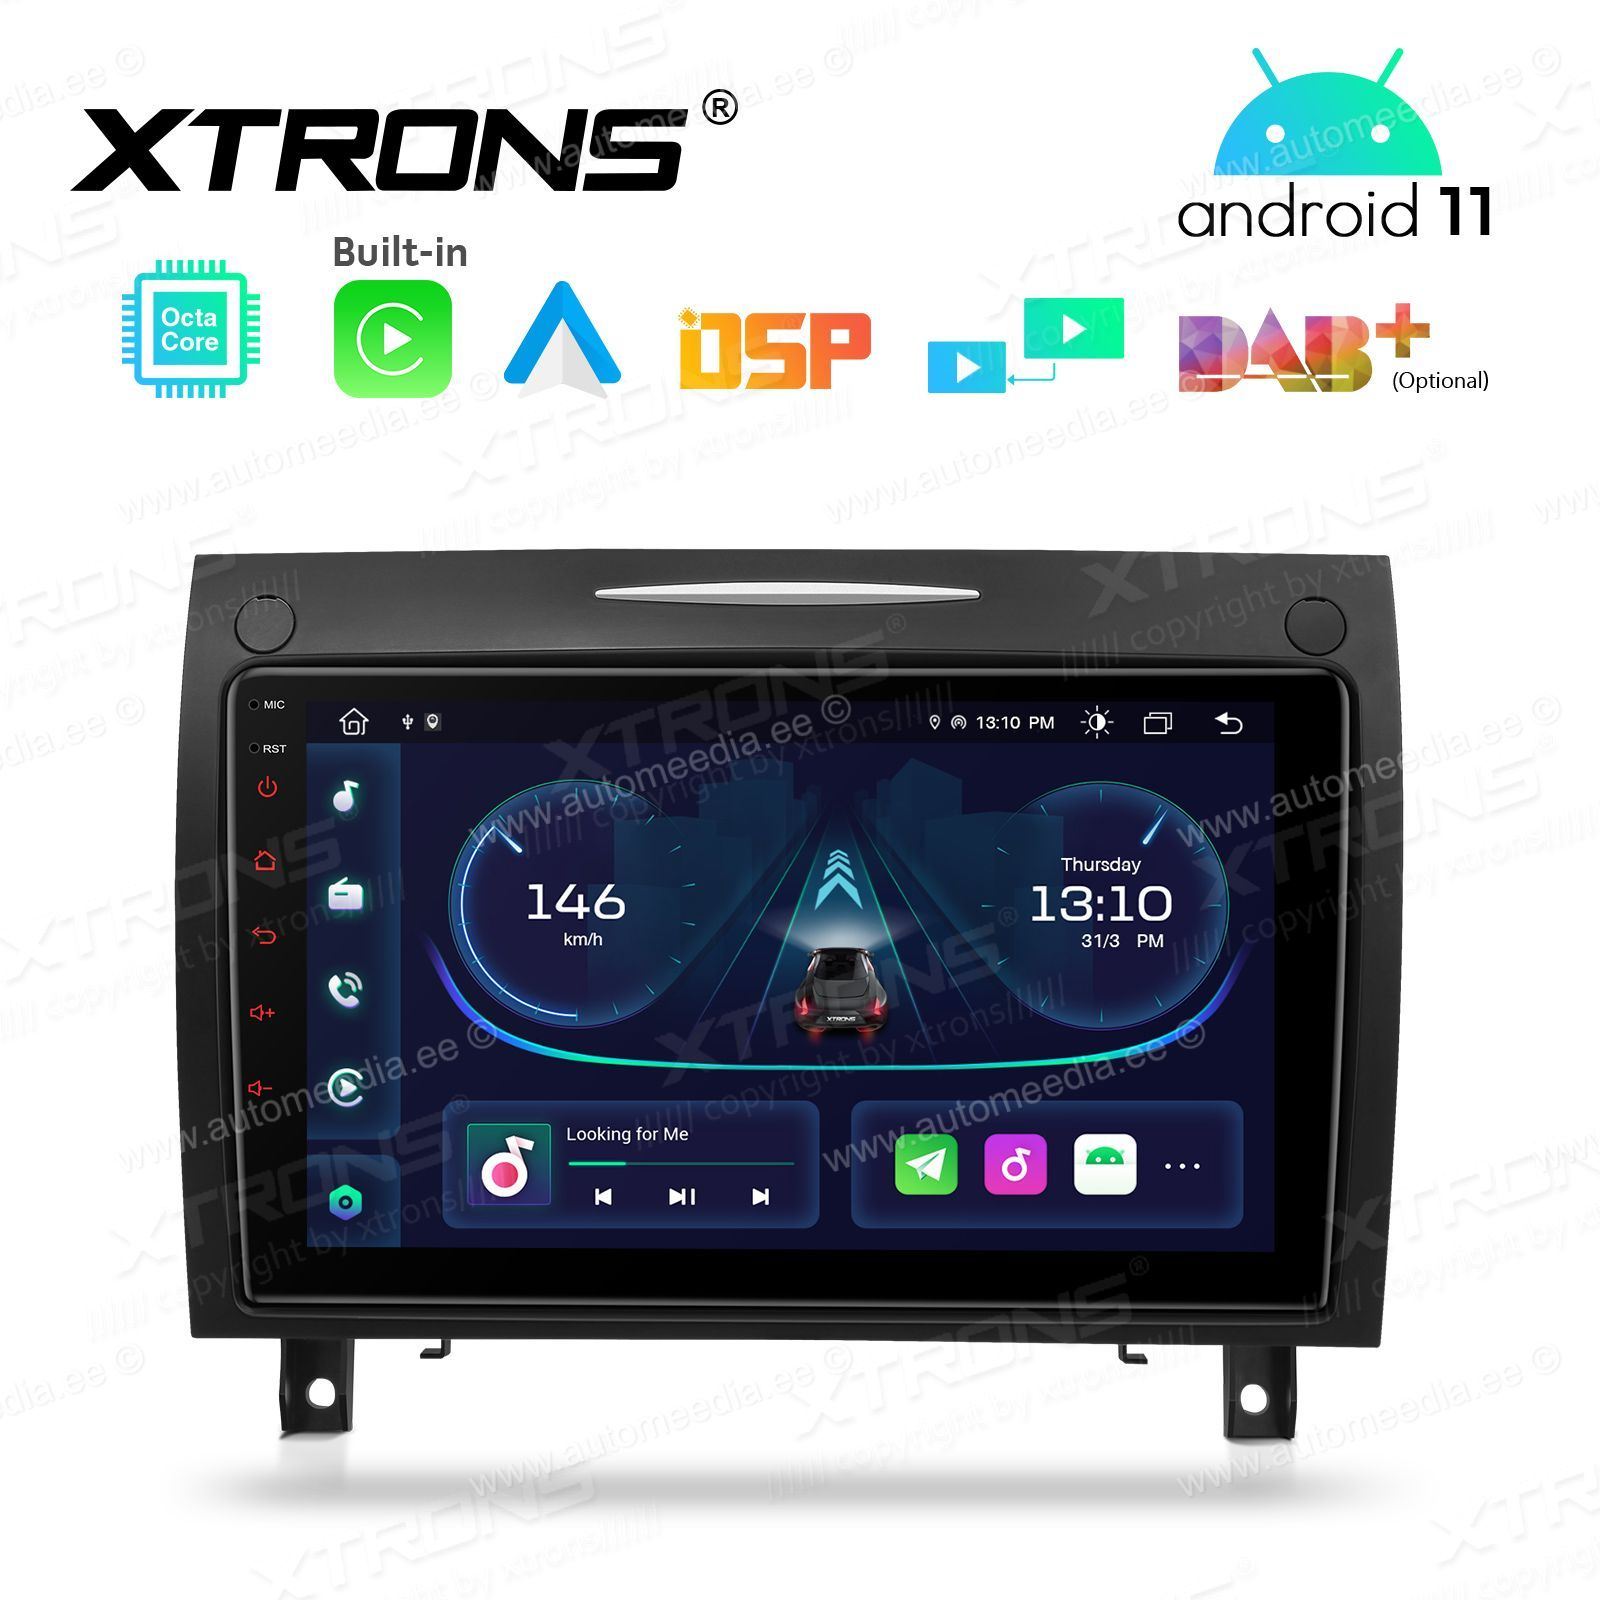 Mercedes-Benz SLK R171 (2004-2011) Android 11 Car Multimedia Player with GPS Navigation